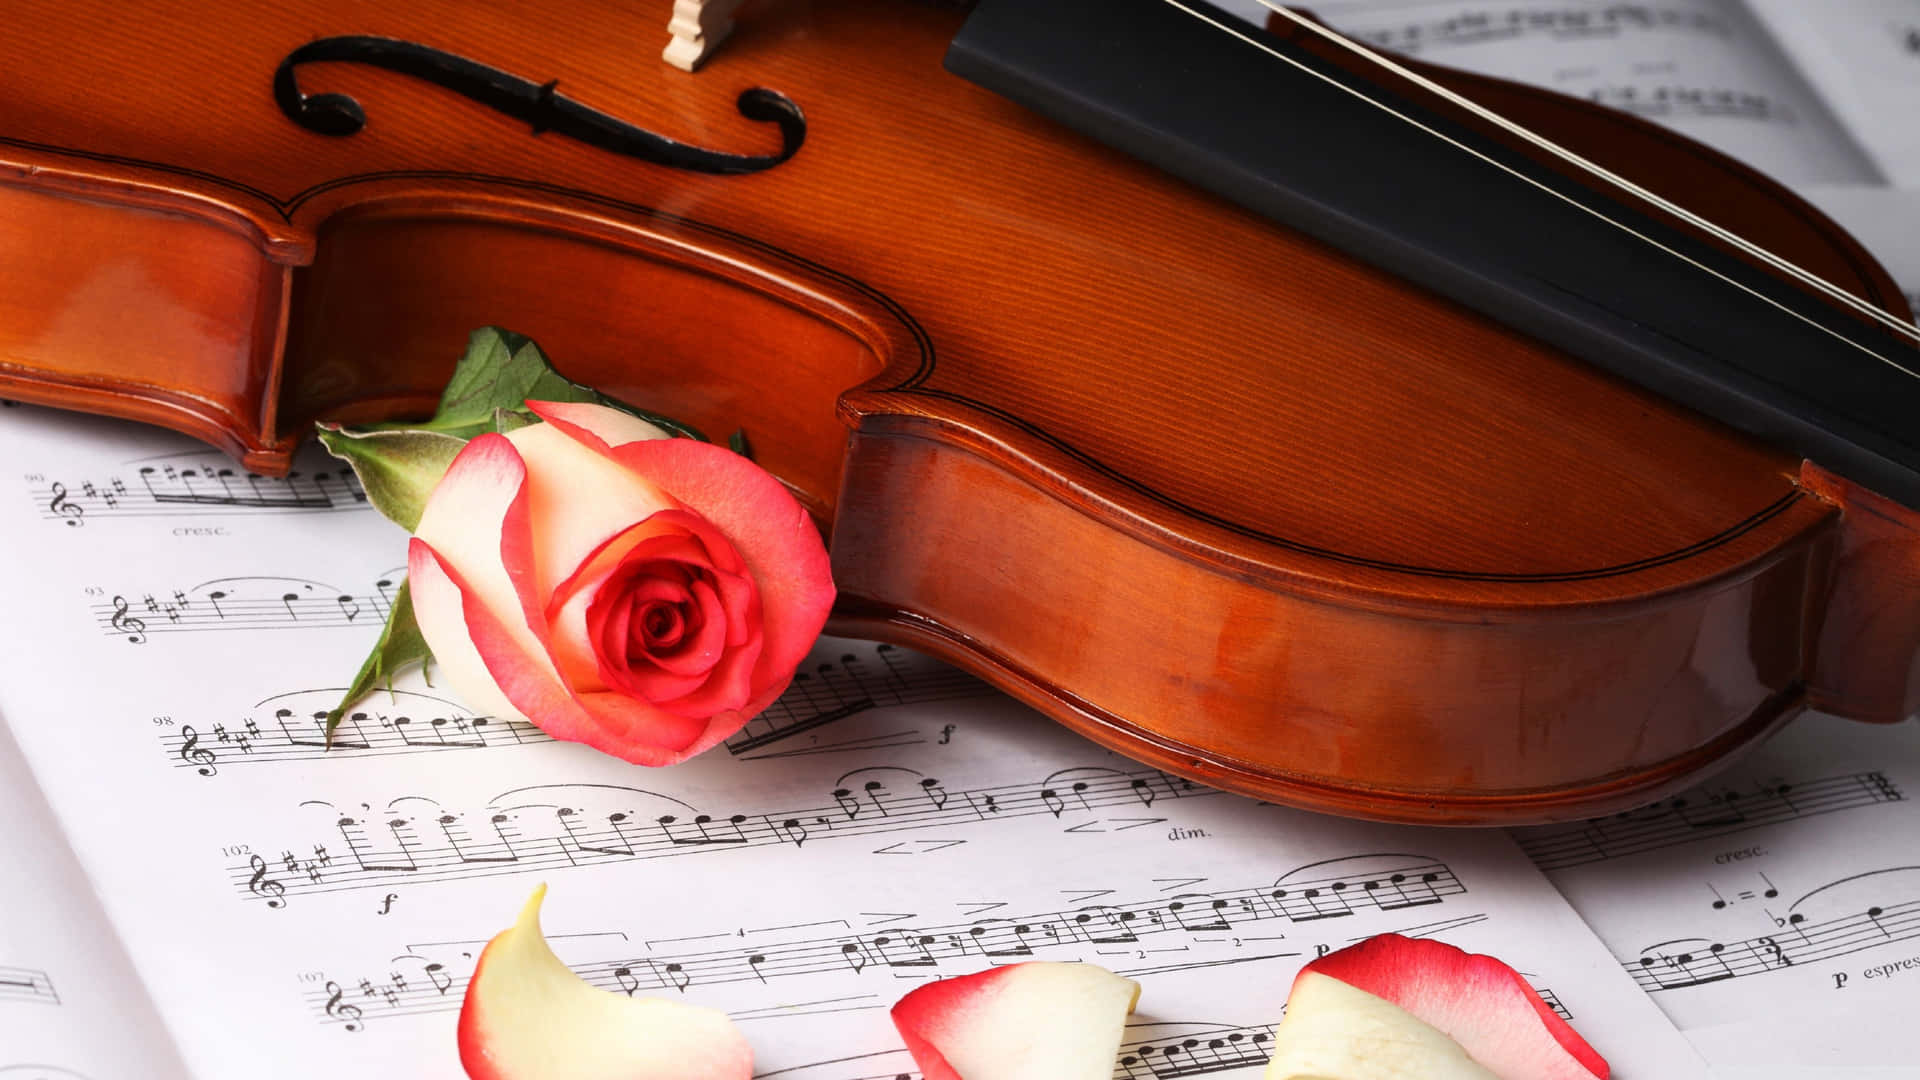 Enjoy the wholesome sound of classical music Wallpaper